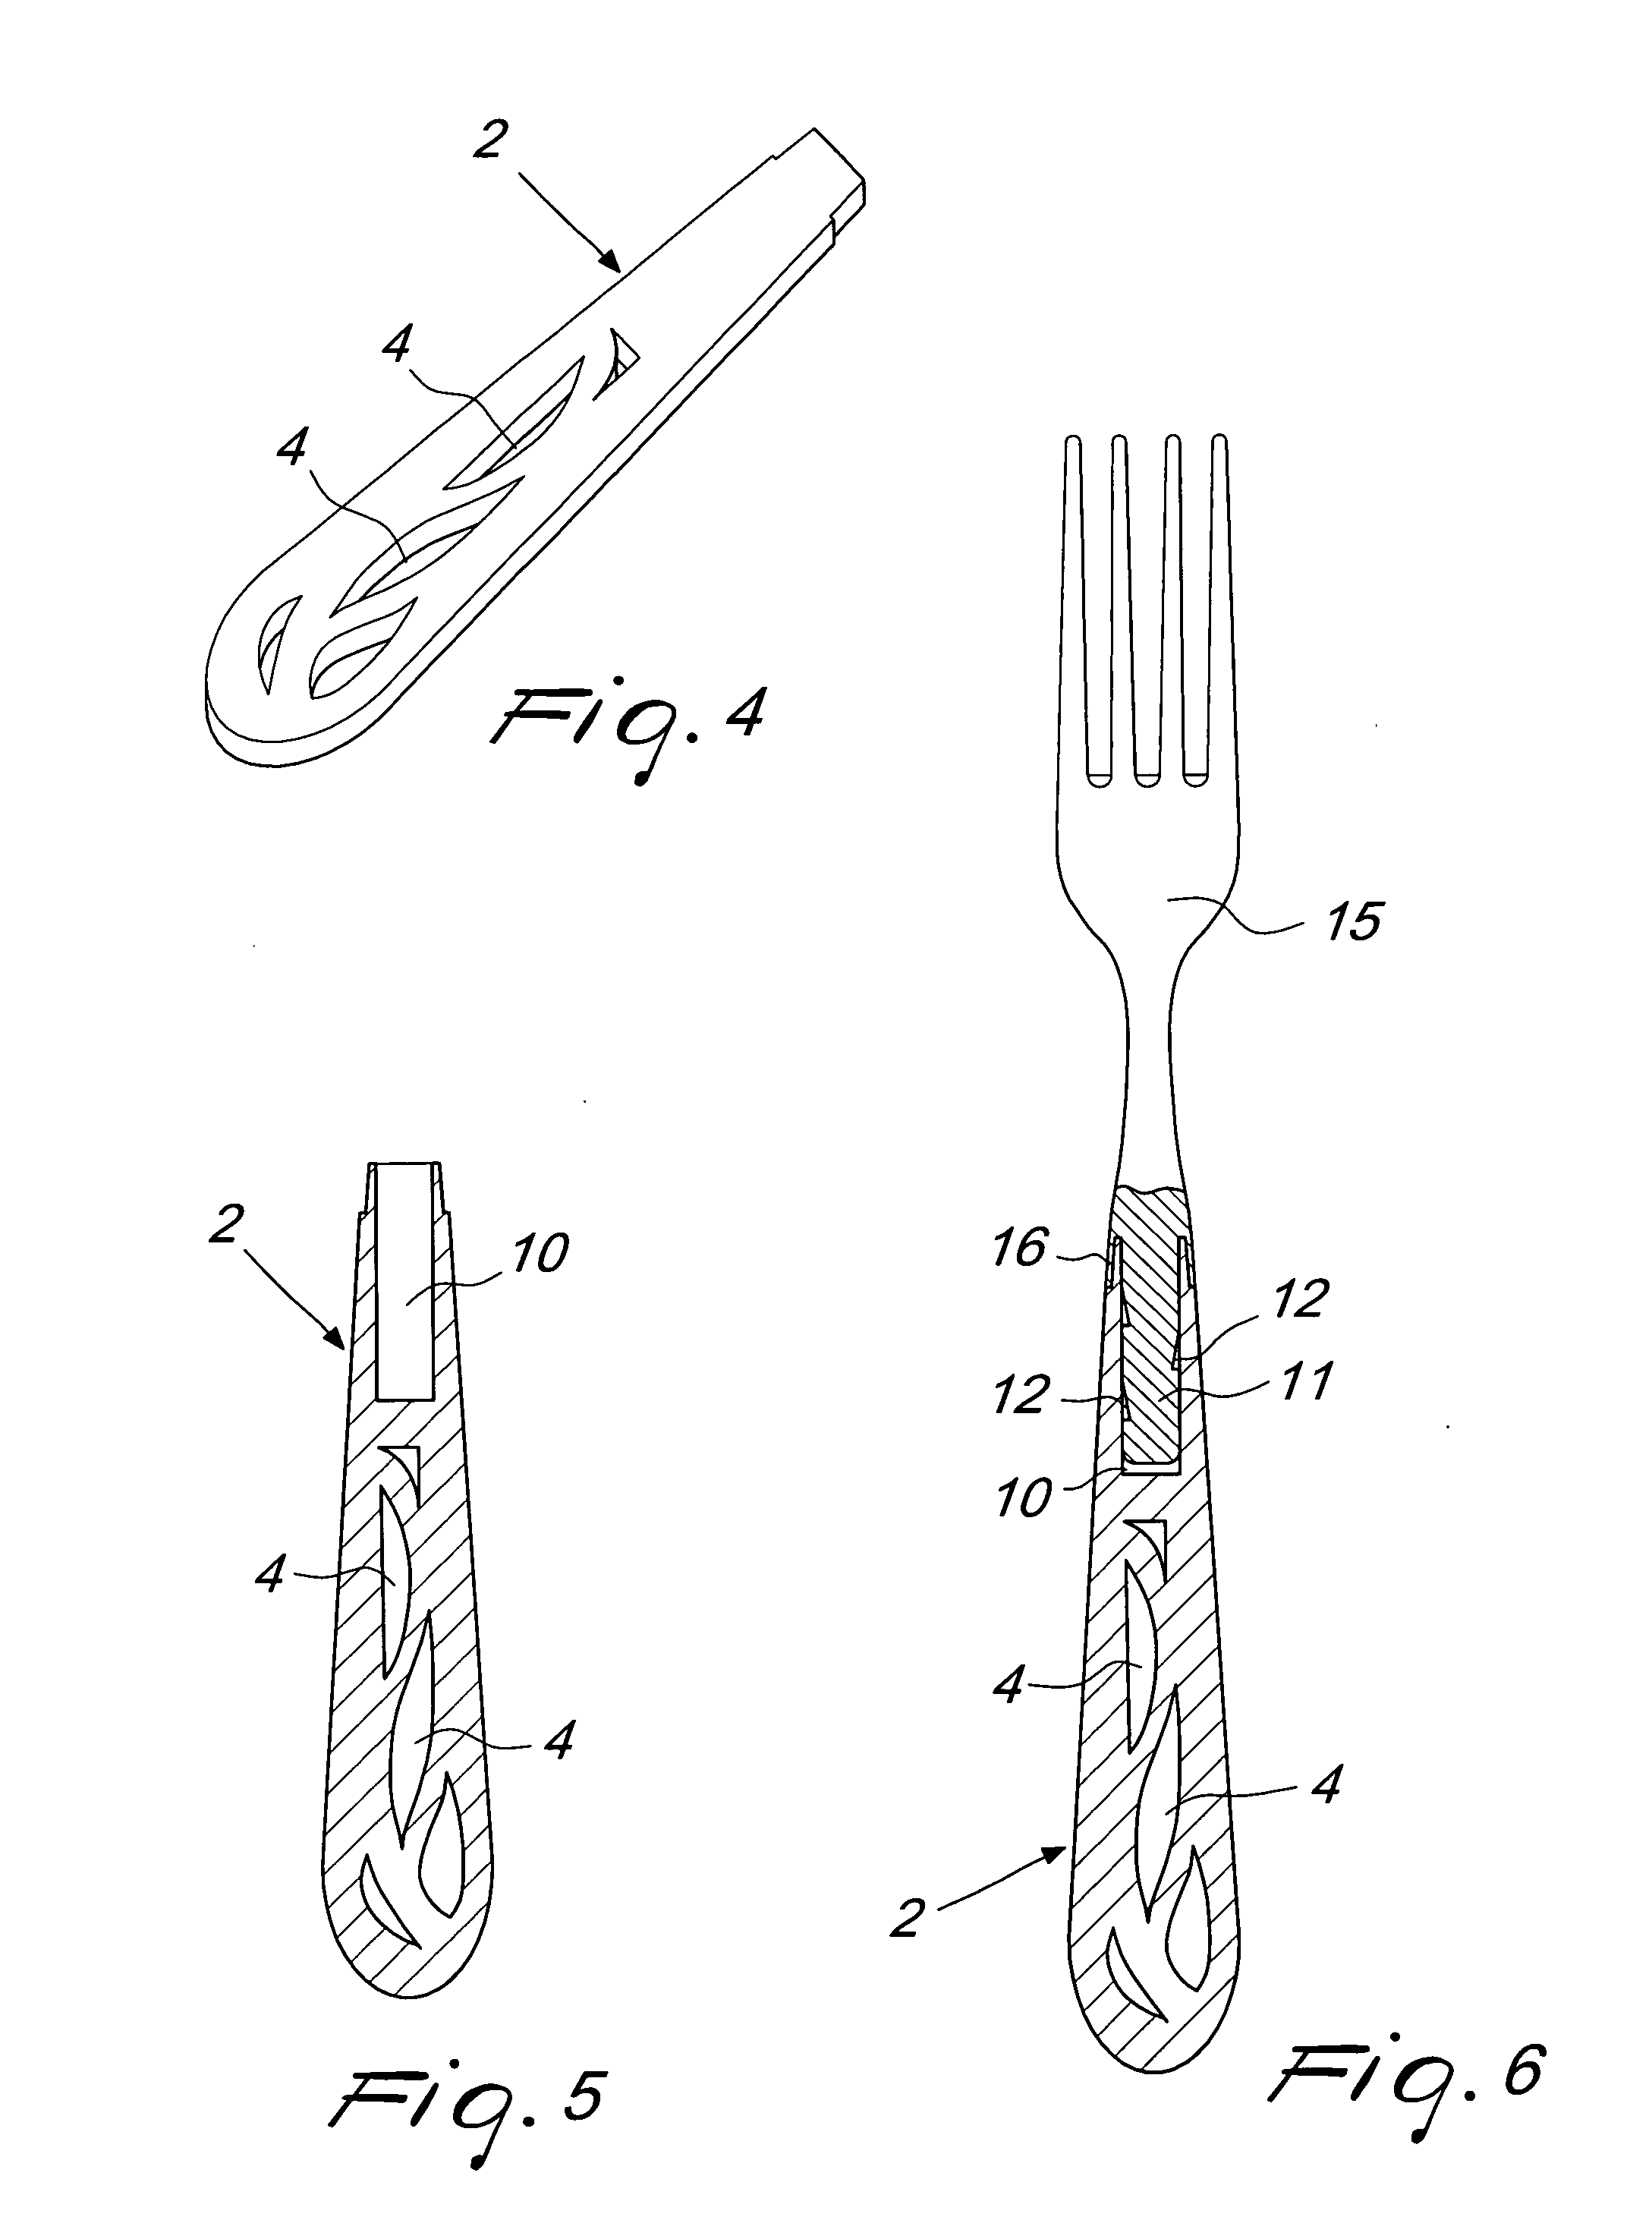 Method for manufacturing table accessories and handles for cutlery, kitchen utensils and the like